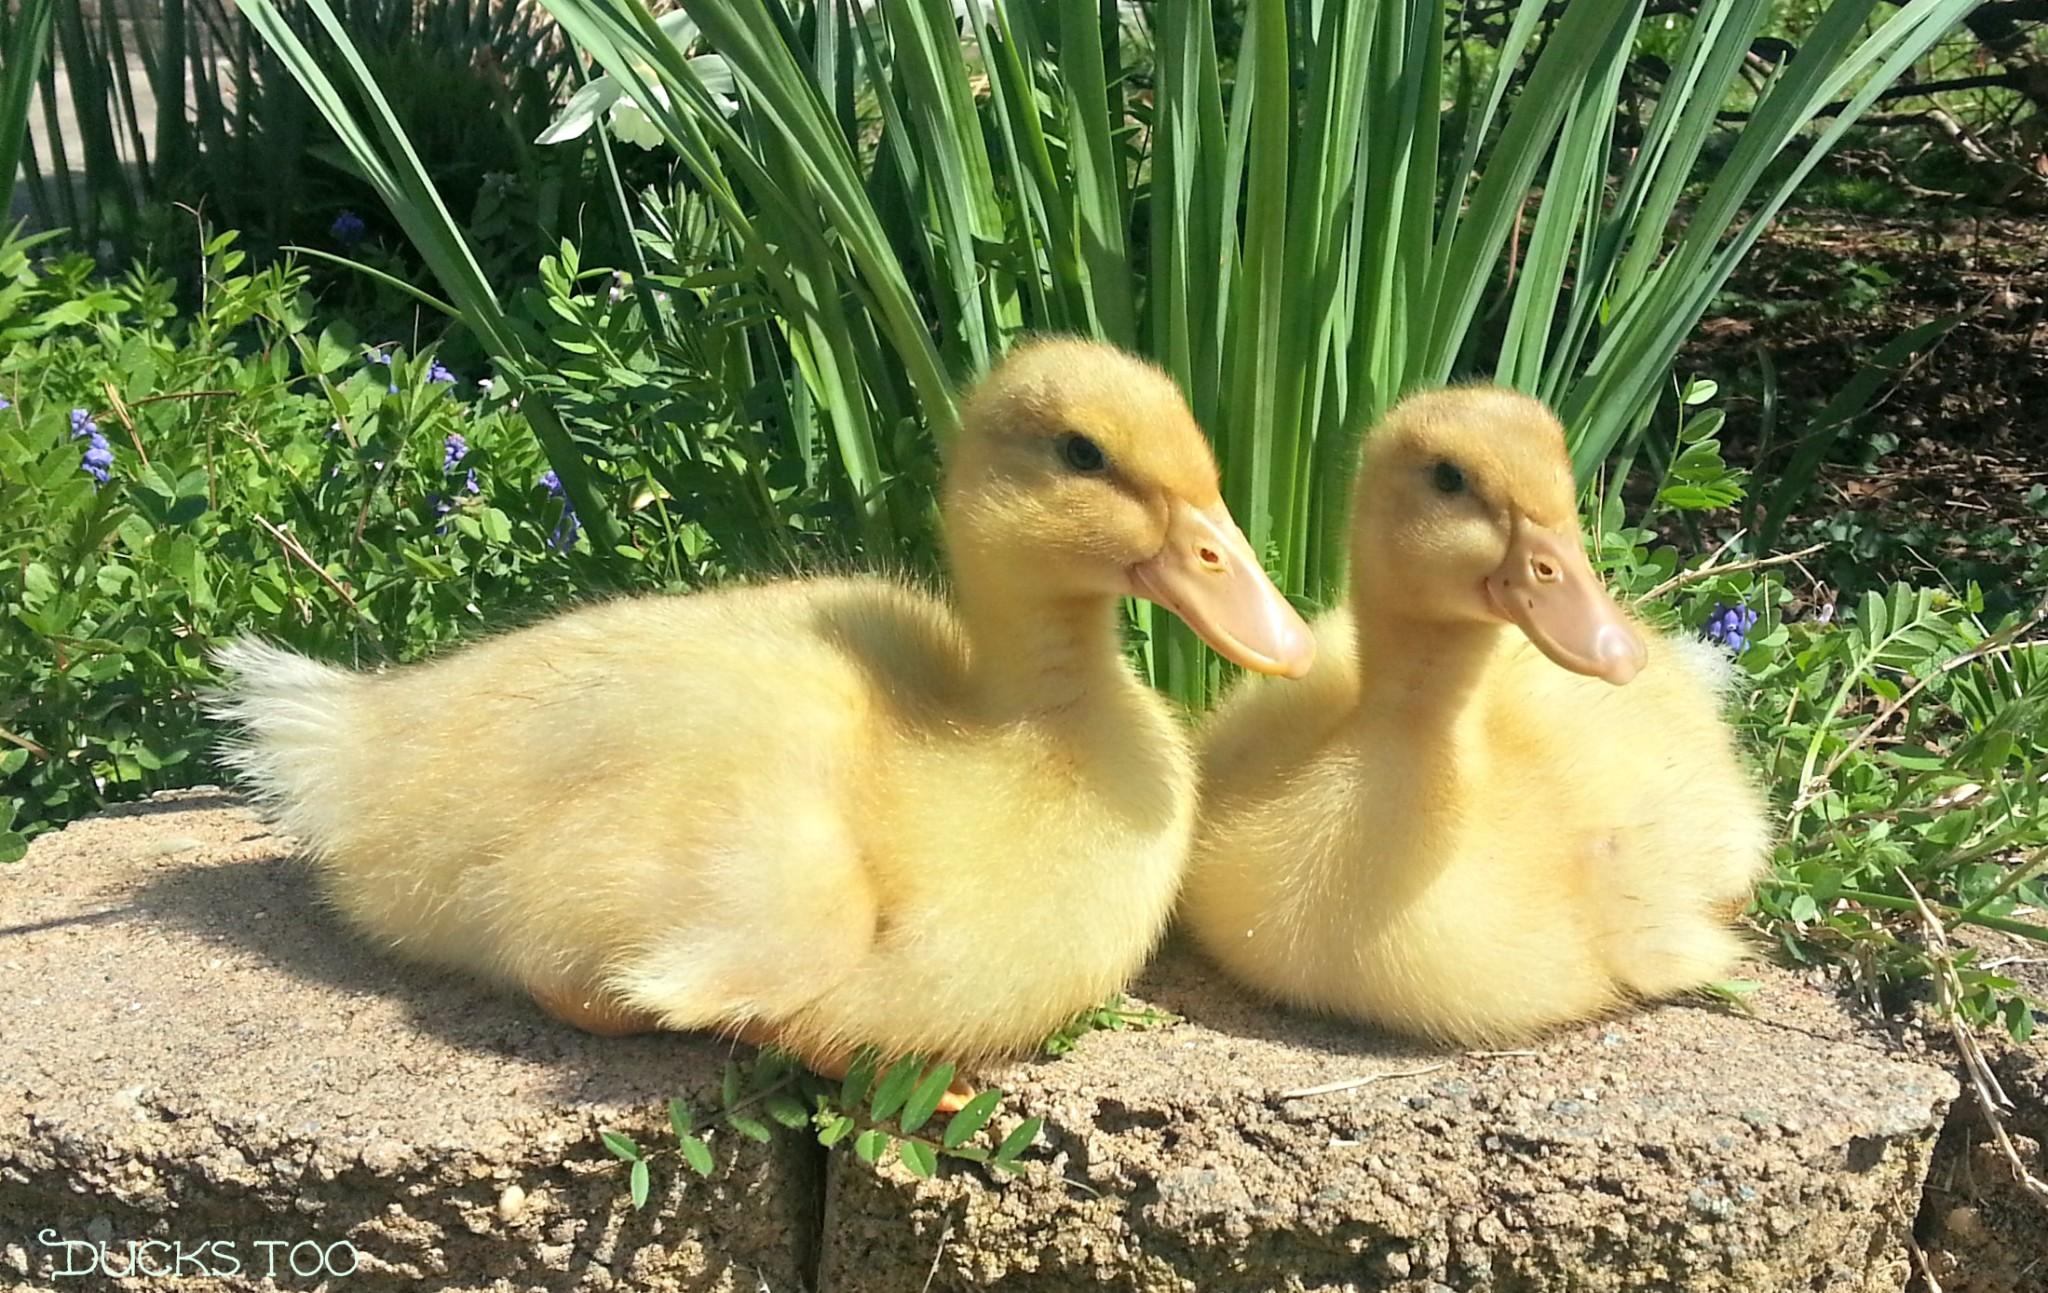 Brooding Ducklings | The Scoop from the Coop